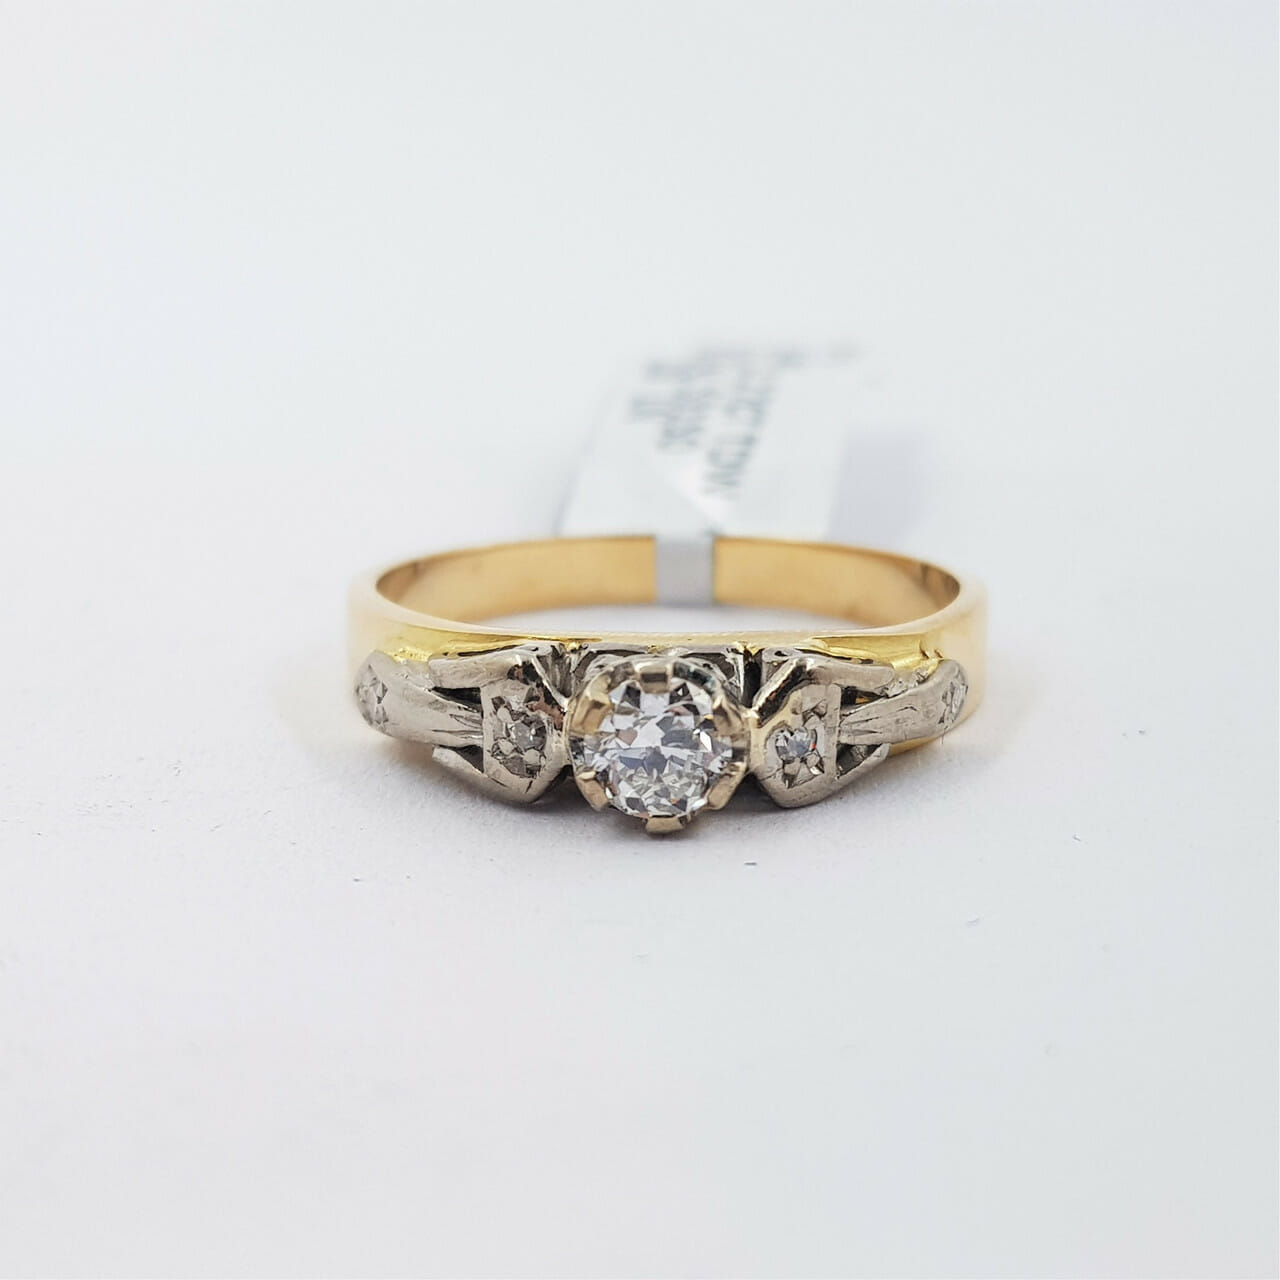 18CT TWO TONE GOLD 0.27CT TDW DIAMOND RING VAL $3150 SIZE Q #41862